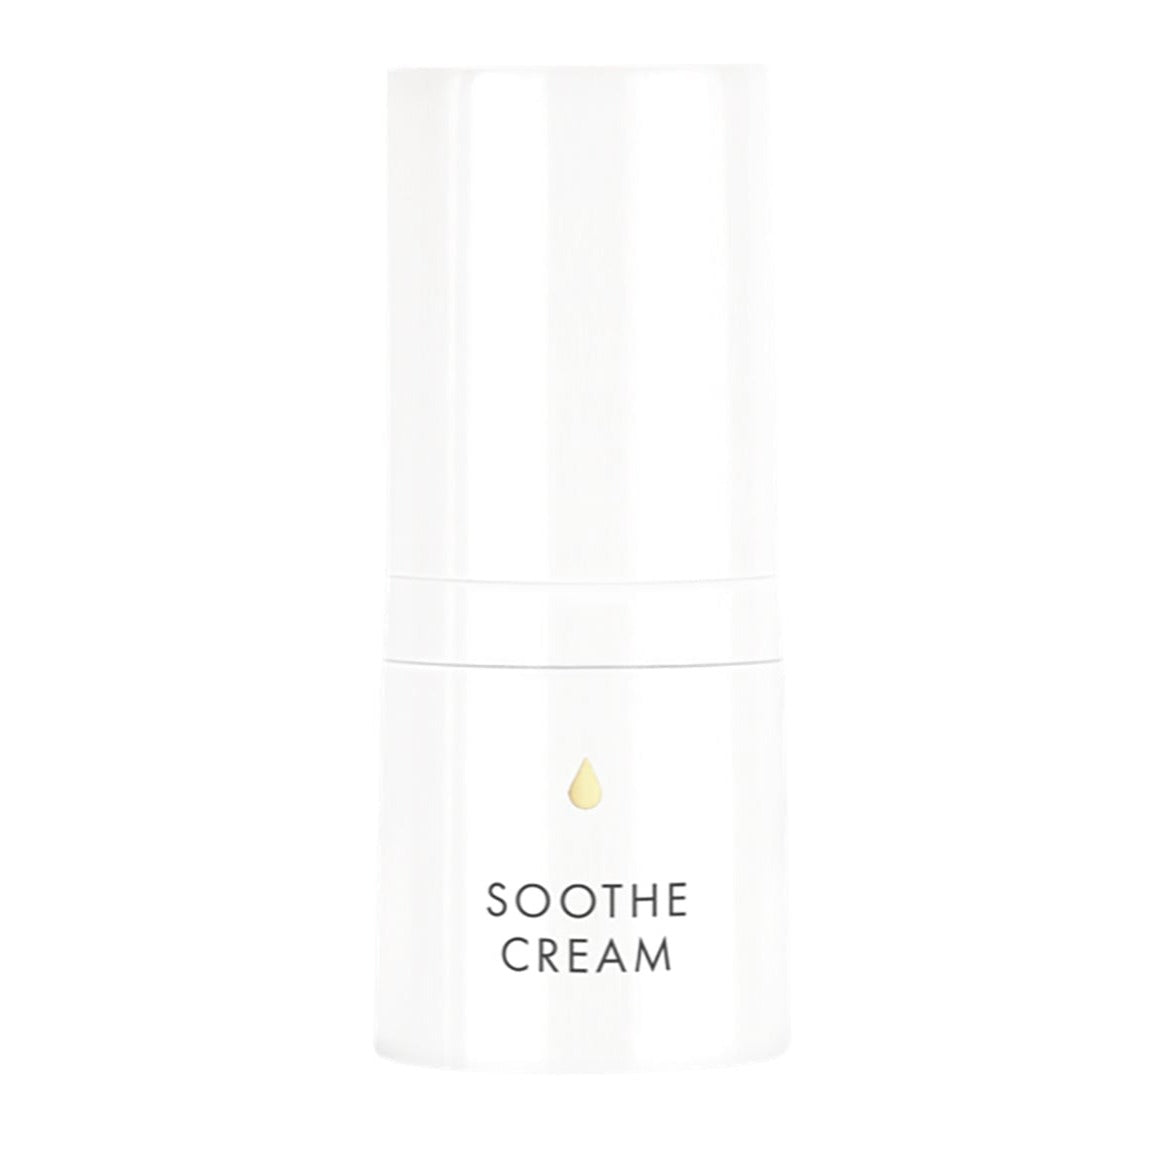 Soothe Cream Sample Other Synthesis Organics 3ml 